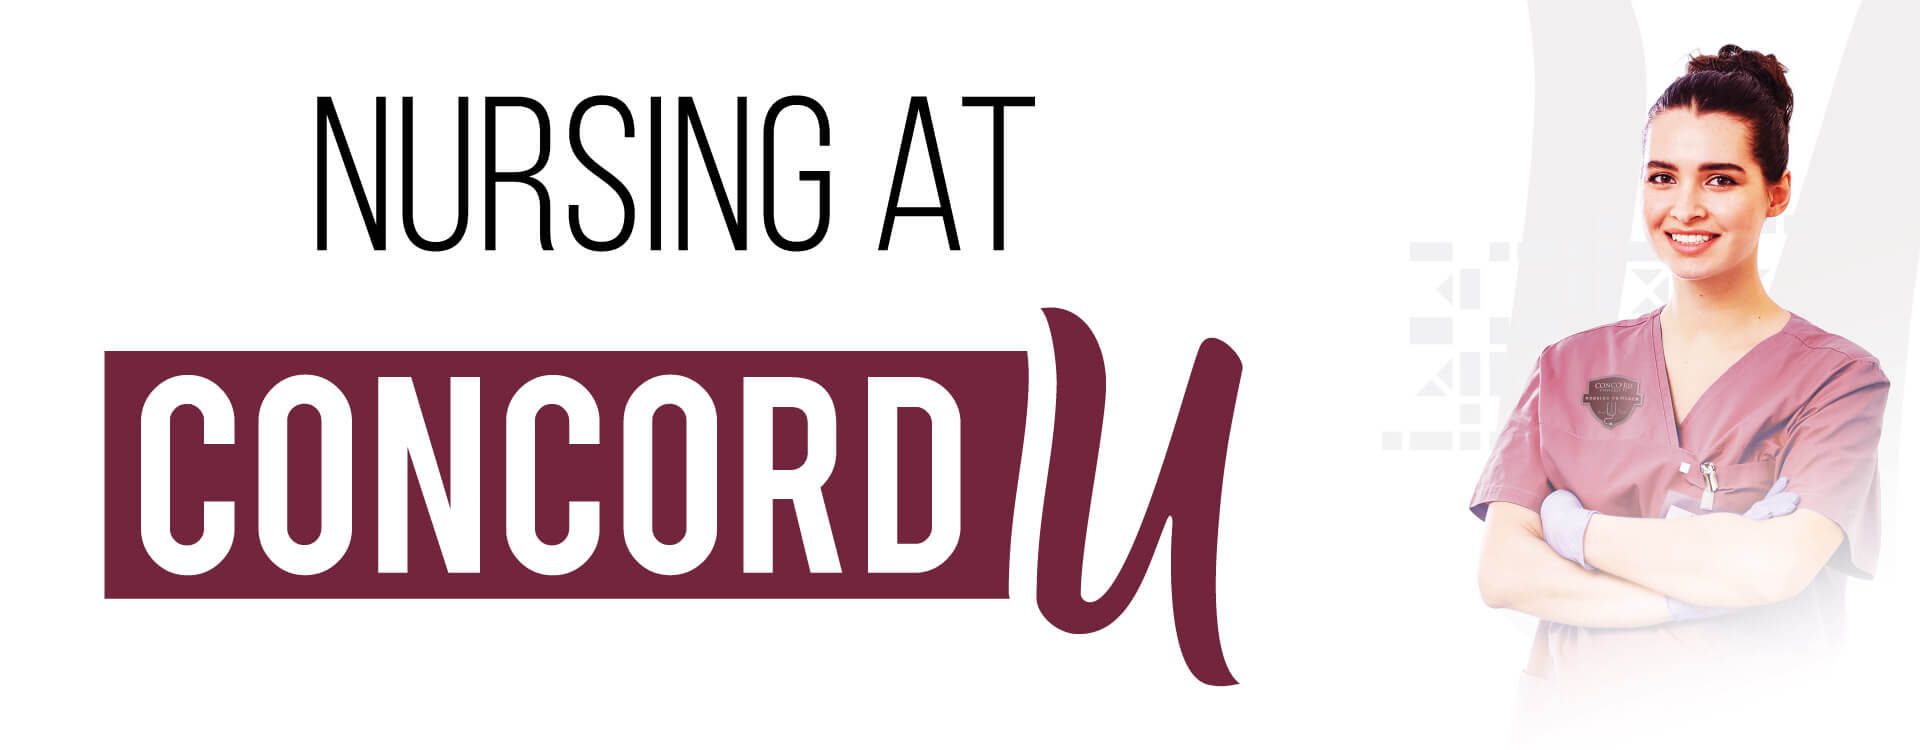 Nursing at Concord University! Click here to learn more about our new nursing program